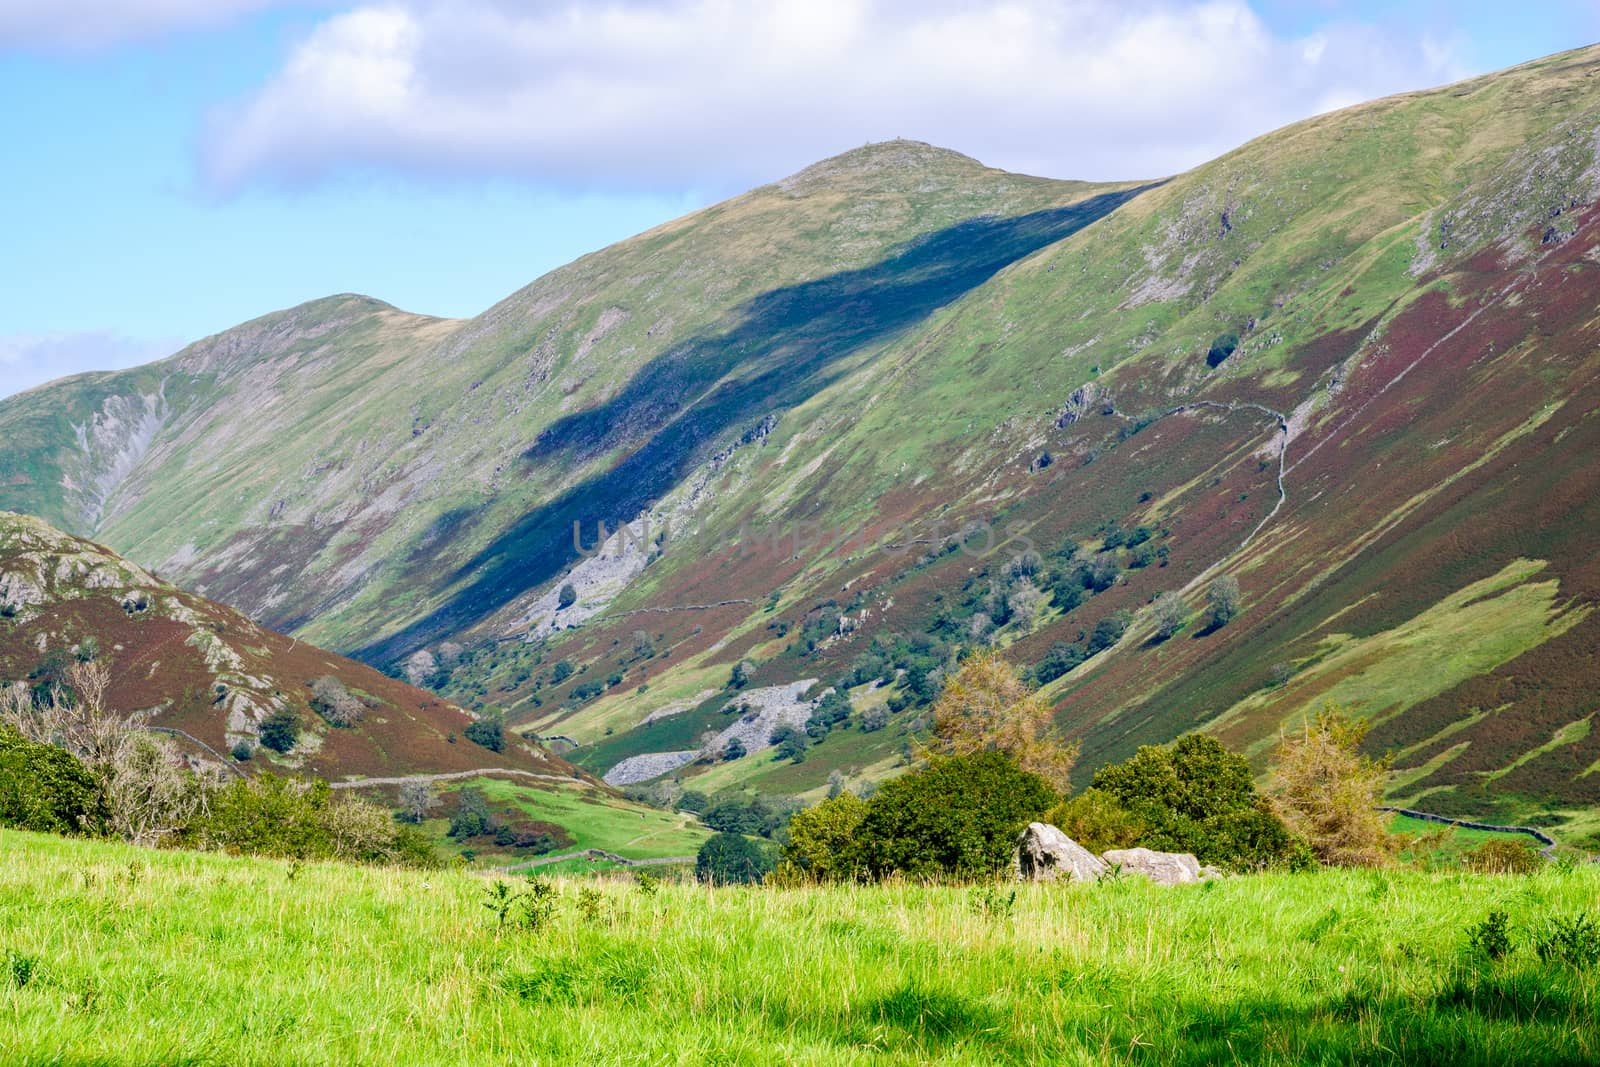 Rolling fells and valley in the Lake District UK with green fields in the summertime